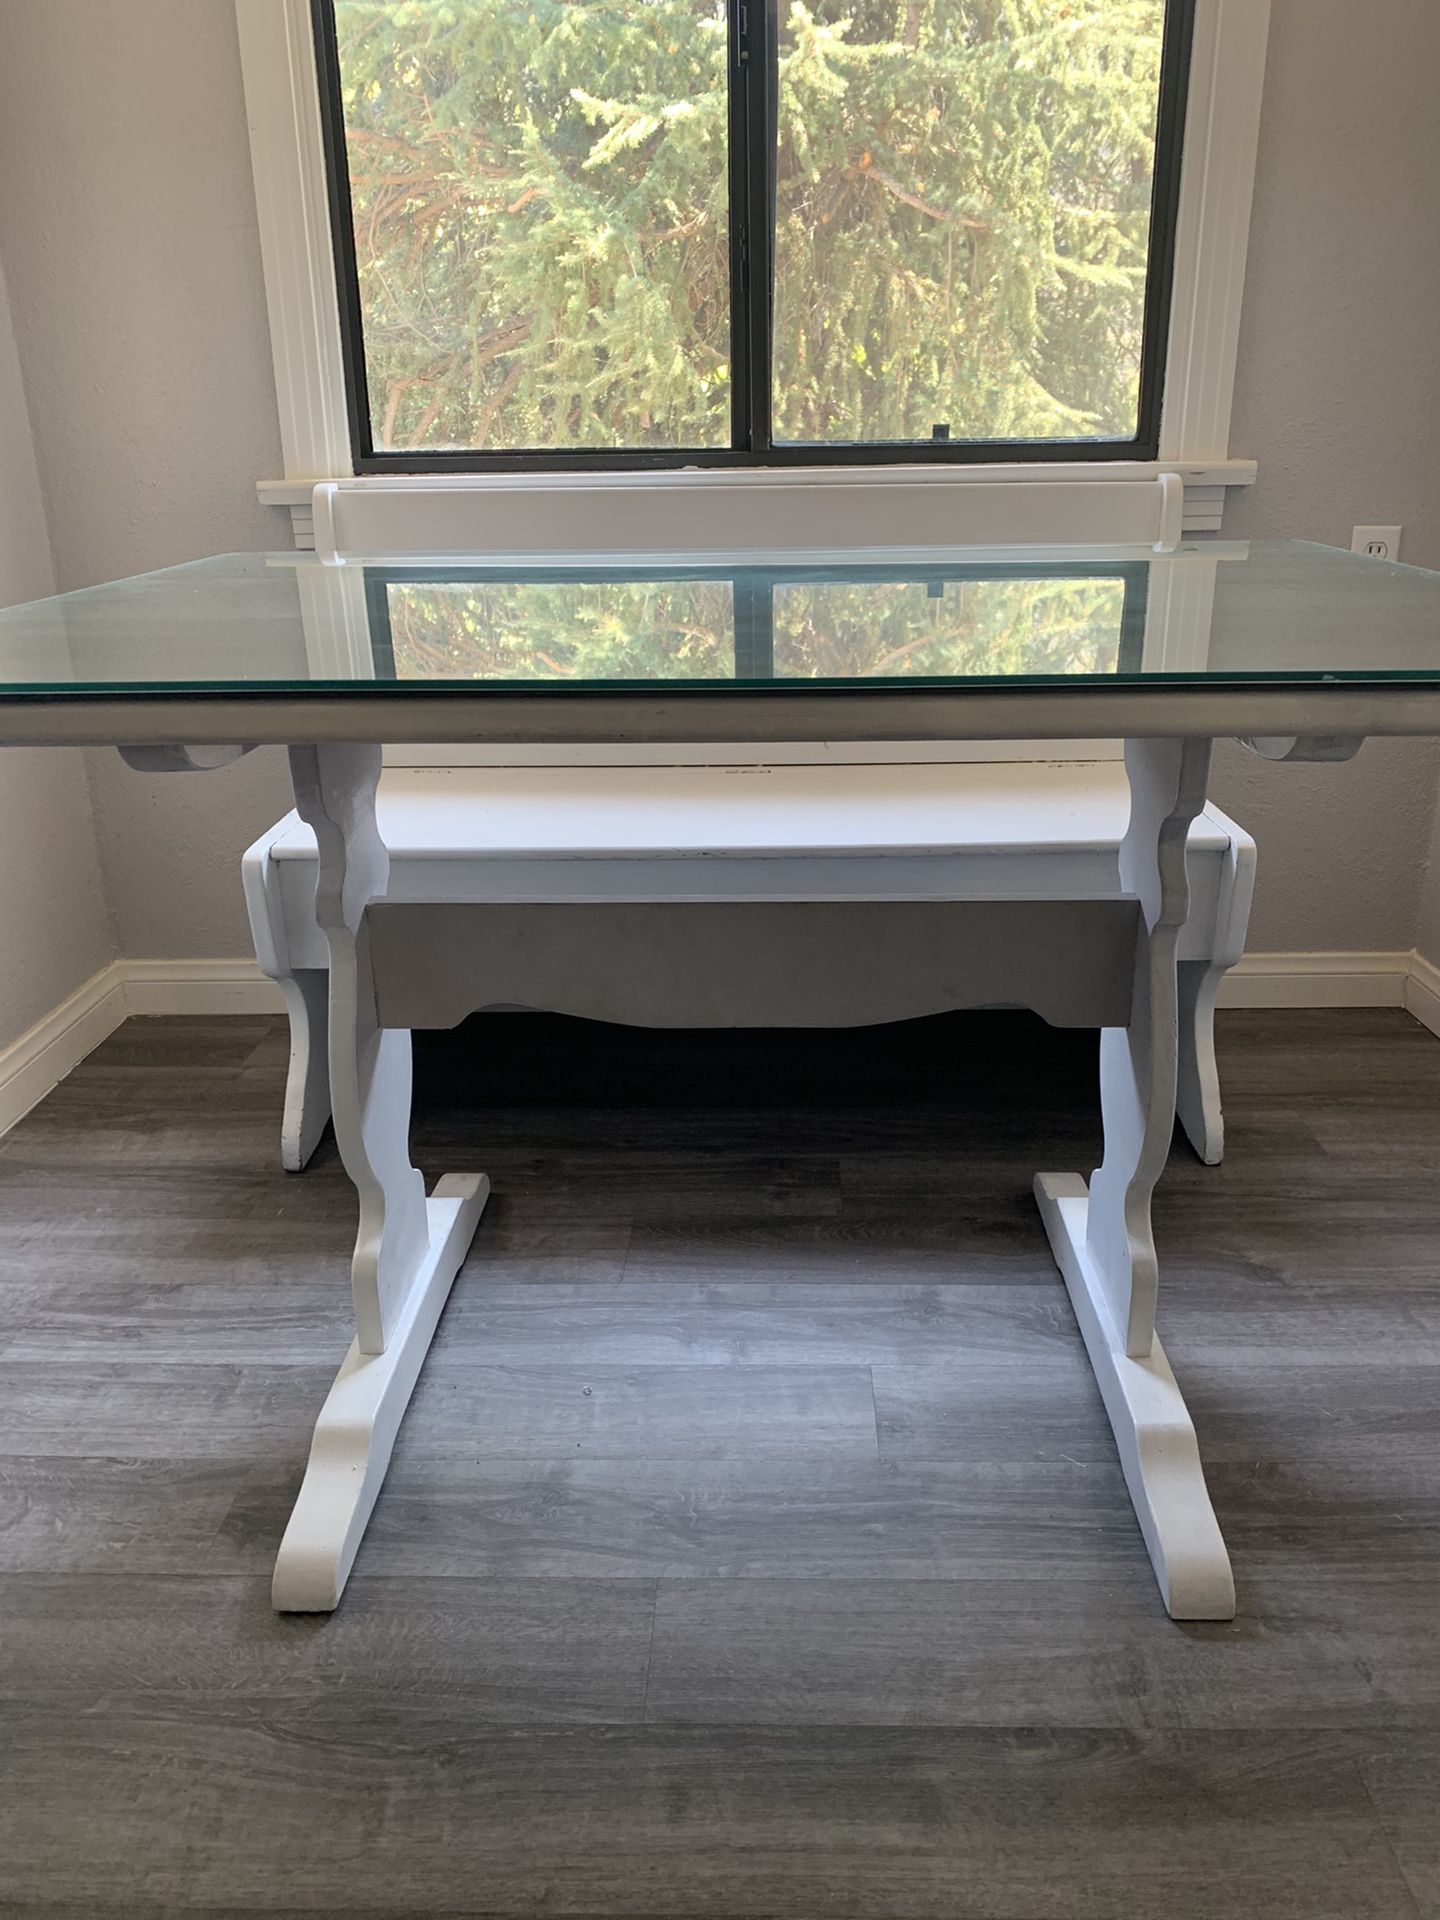 Glass top kitchen table with storage bench